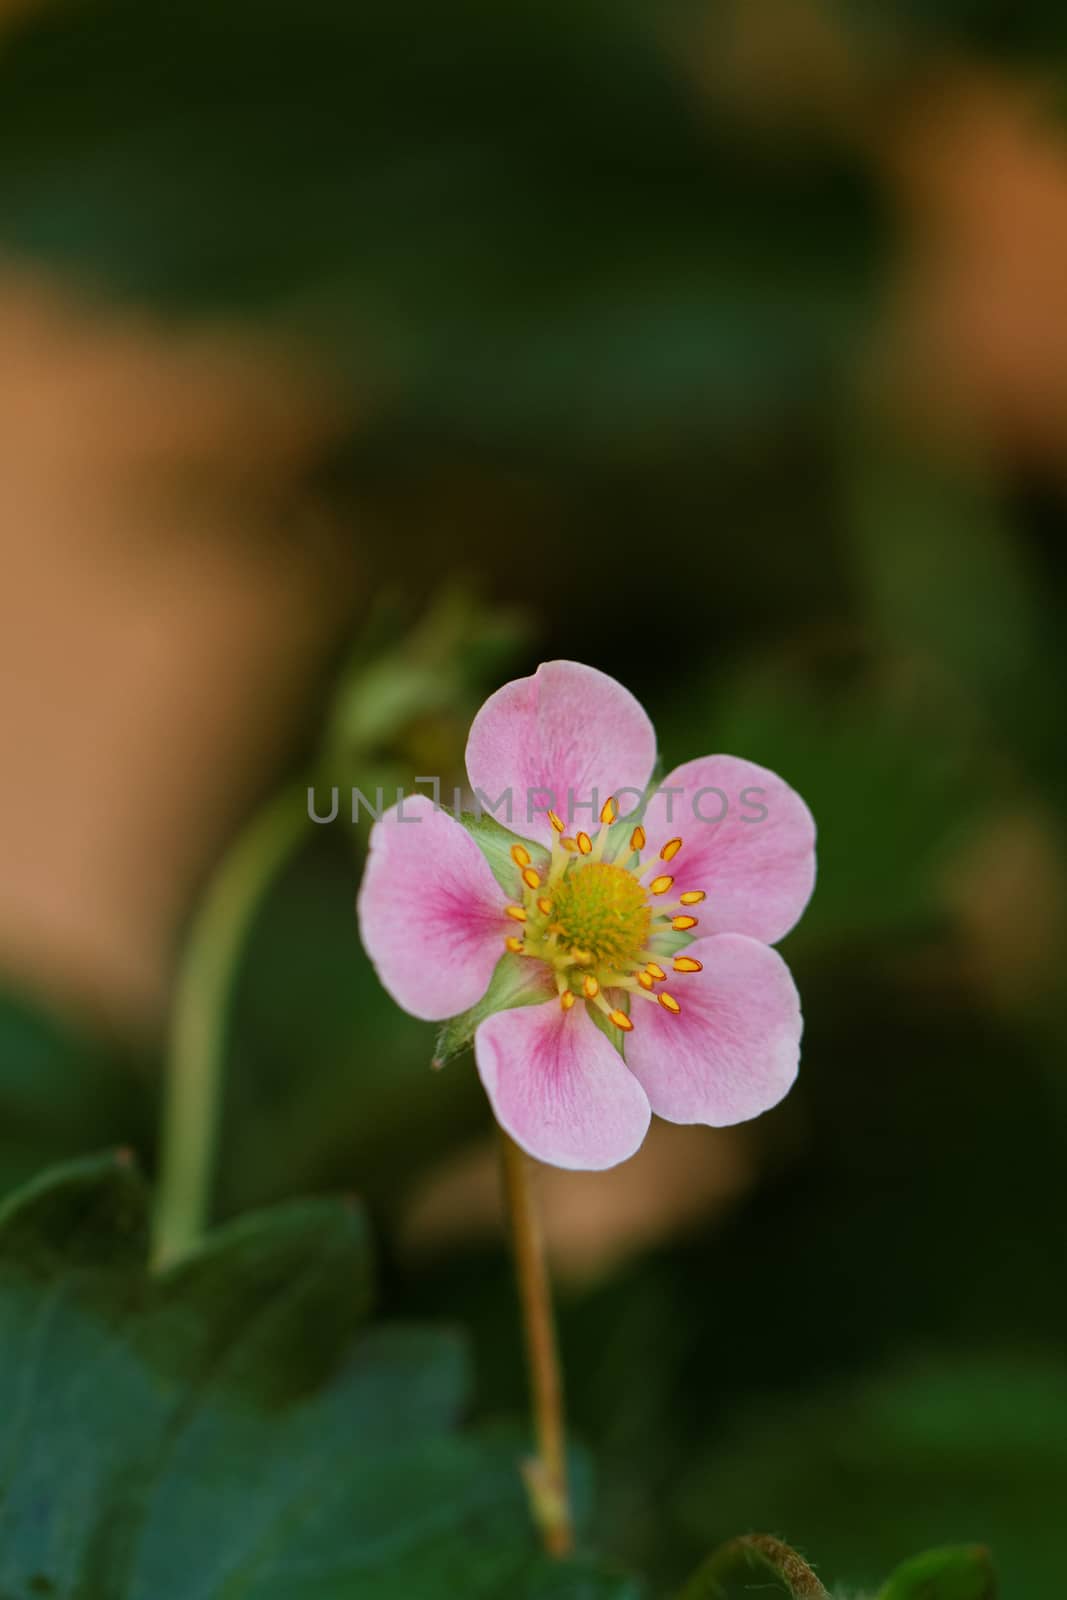 Pink flowers of strawberries in the morning dew